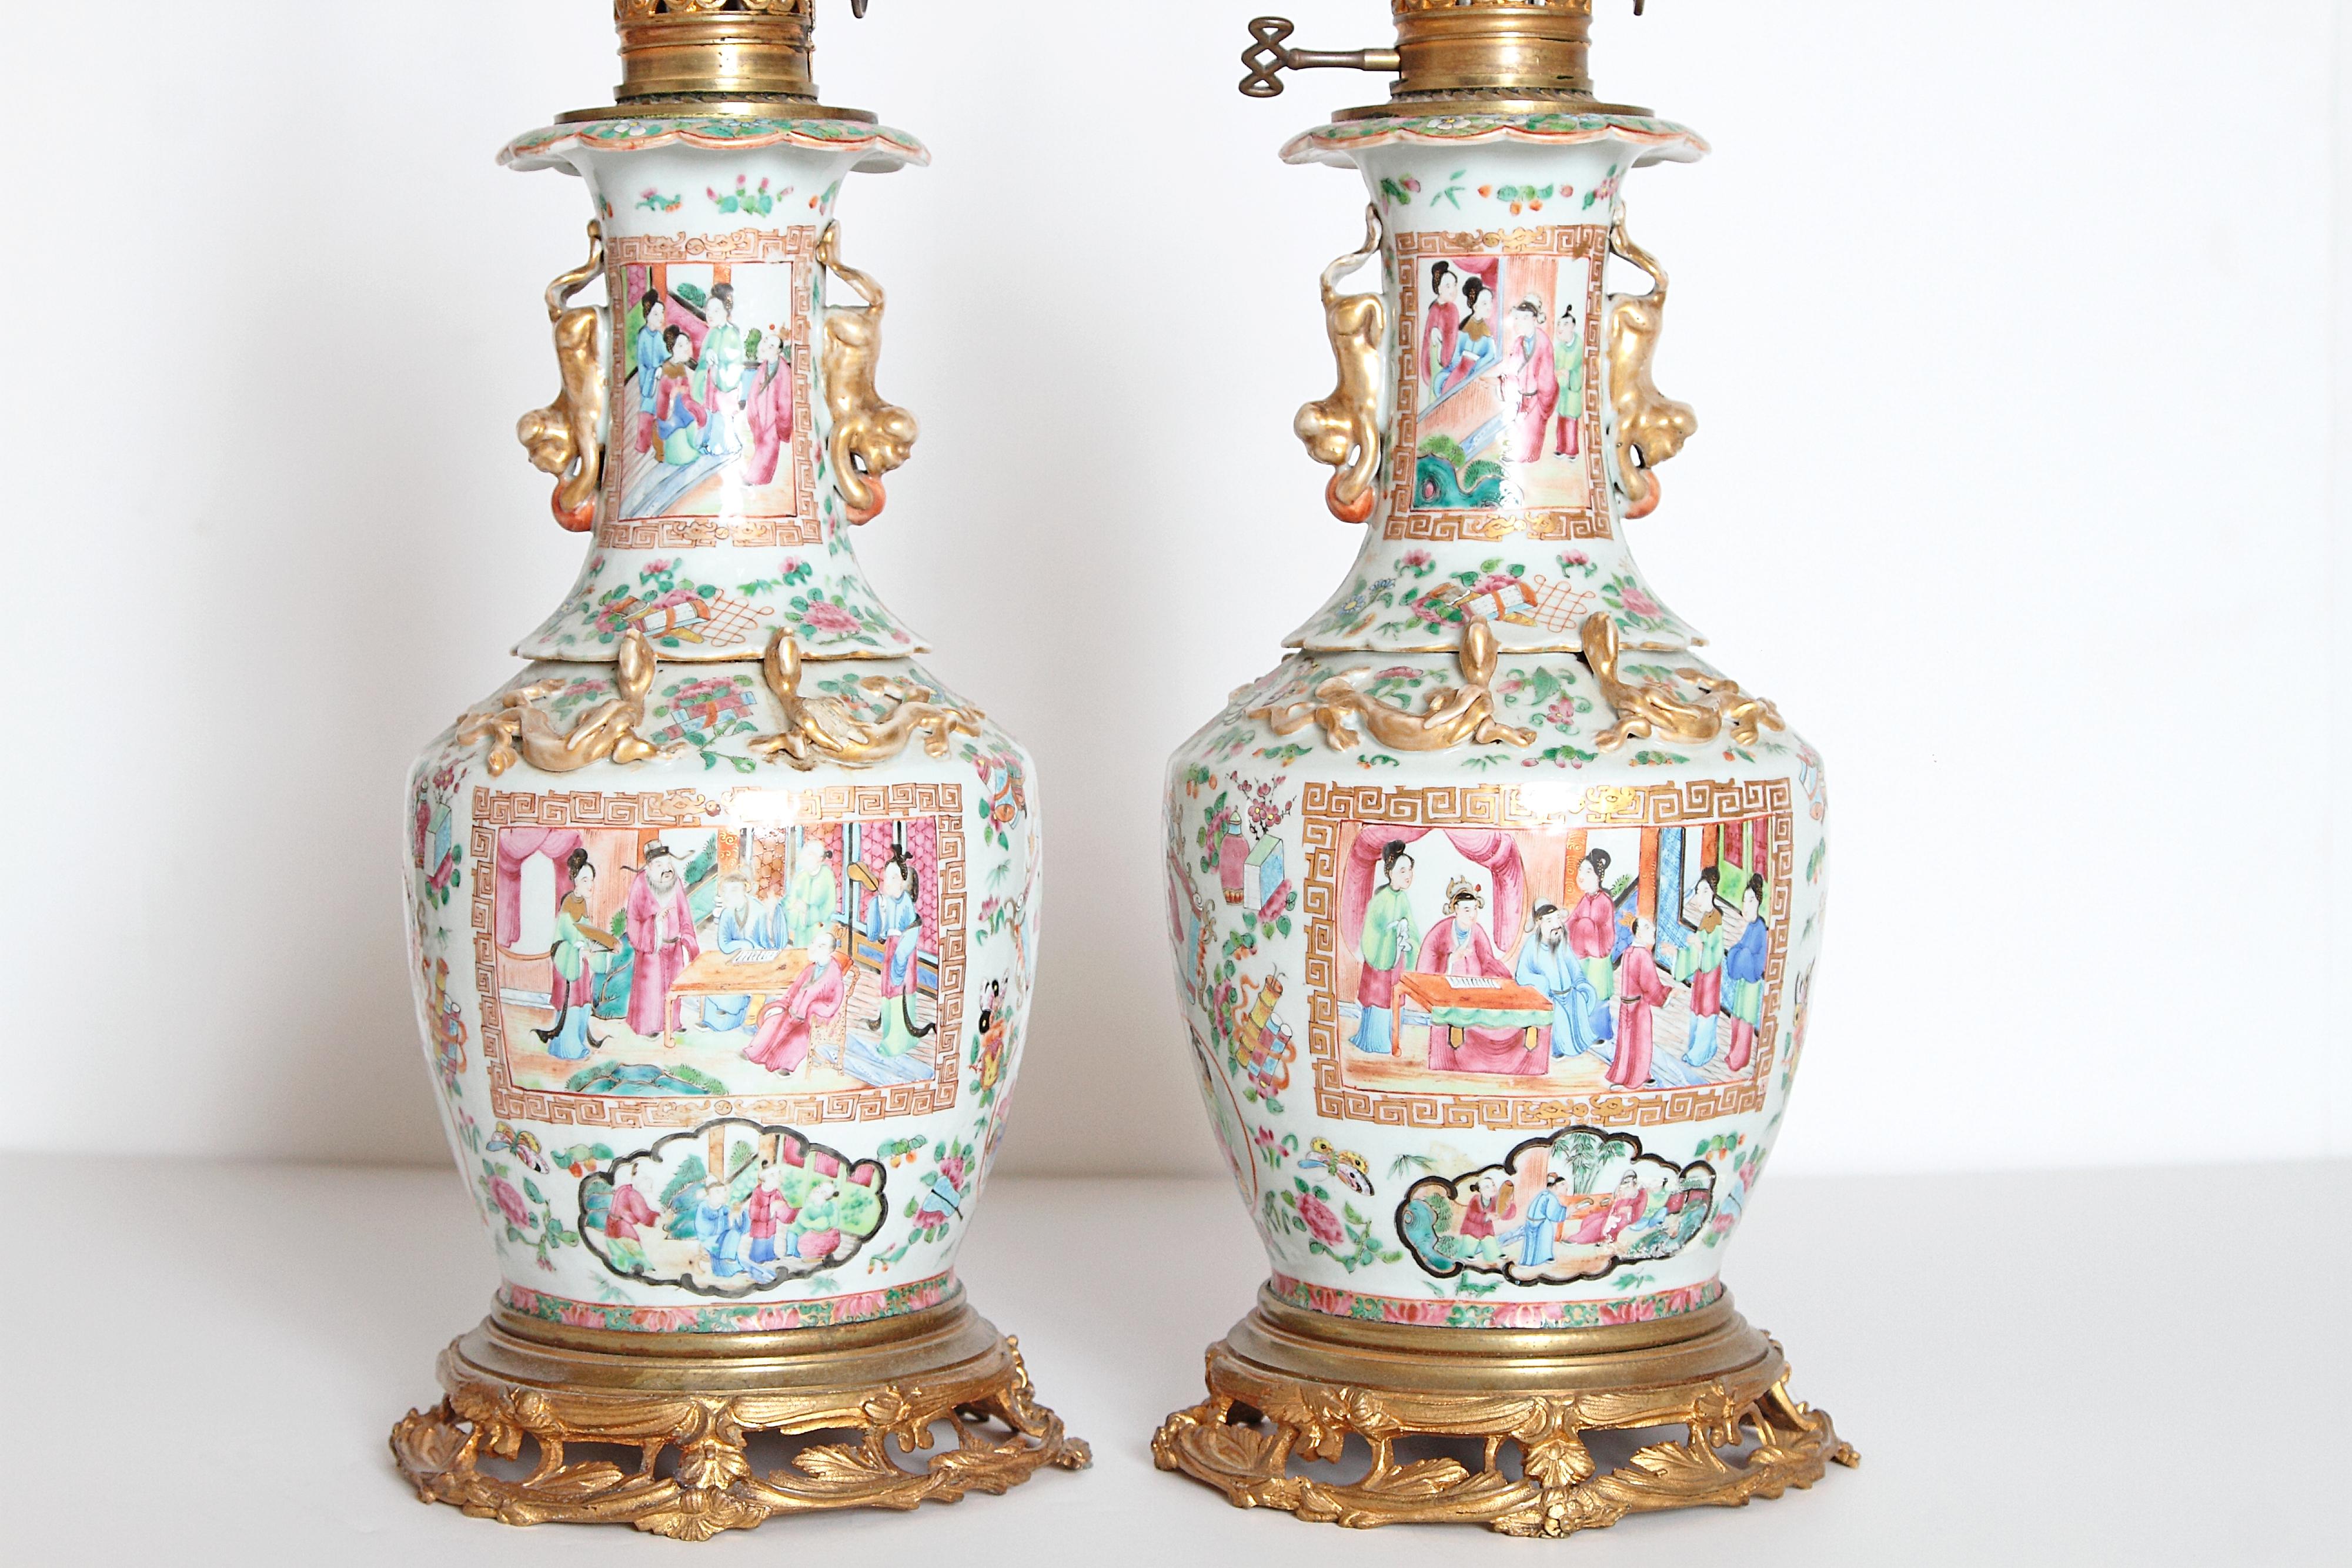 Bronze Pair of 19th Century Chinese Rose Medallion Vases Mounted as Lamps